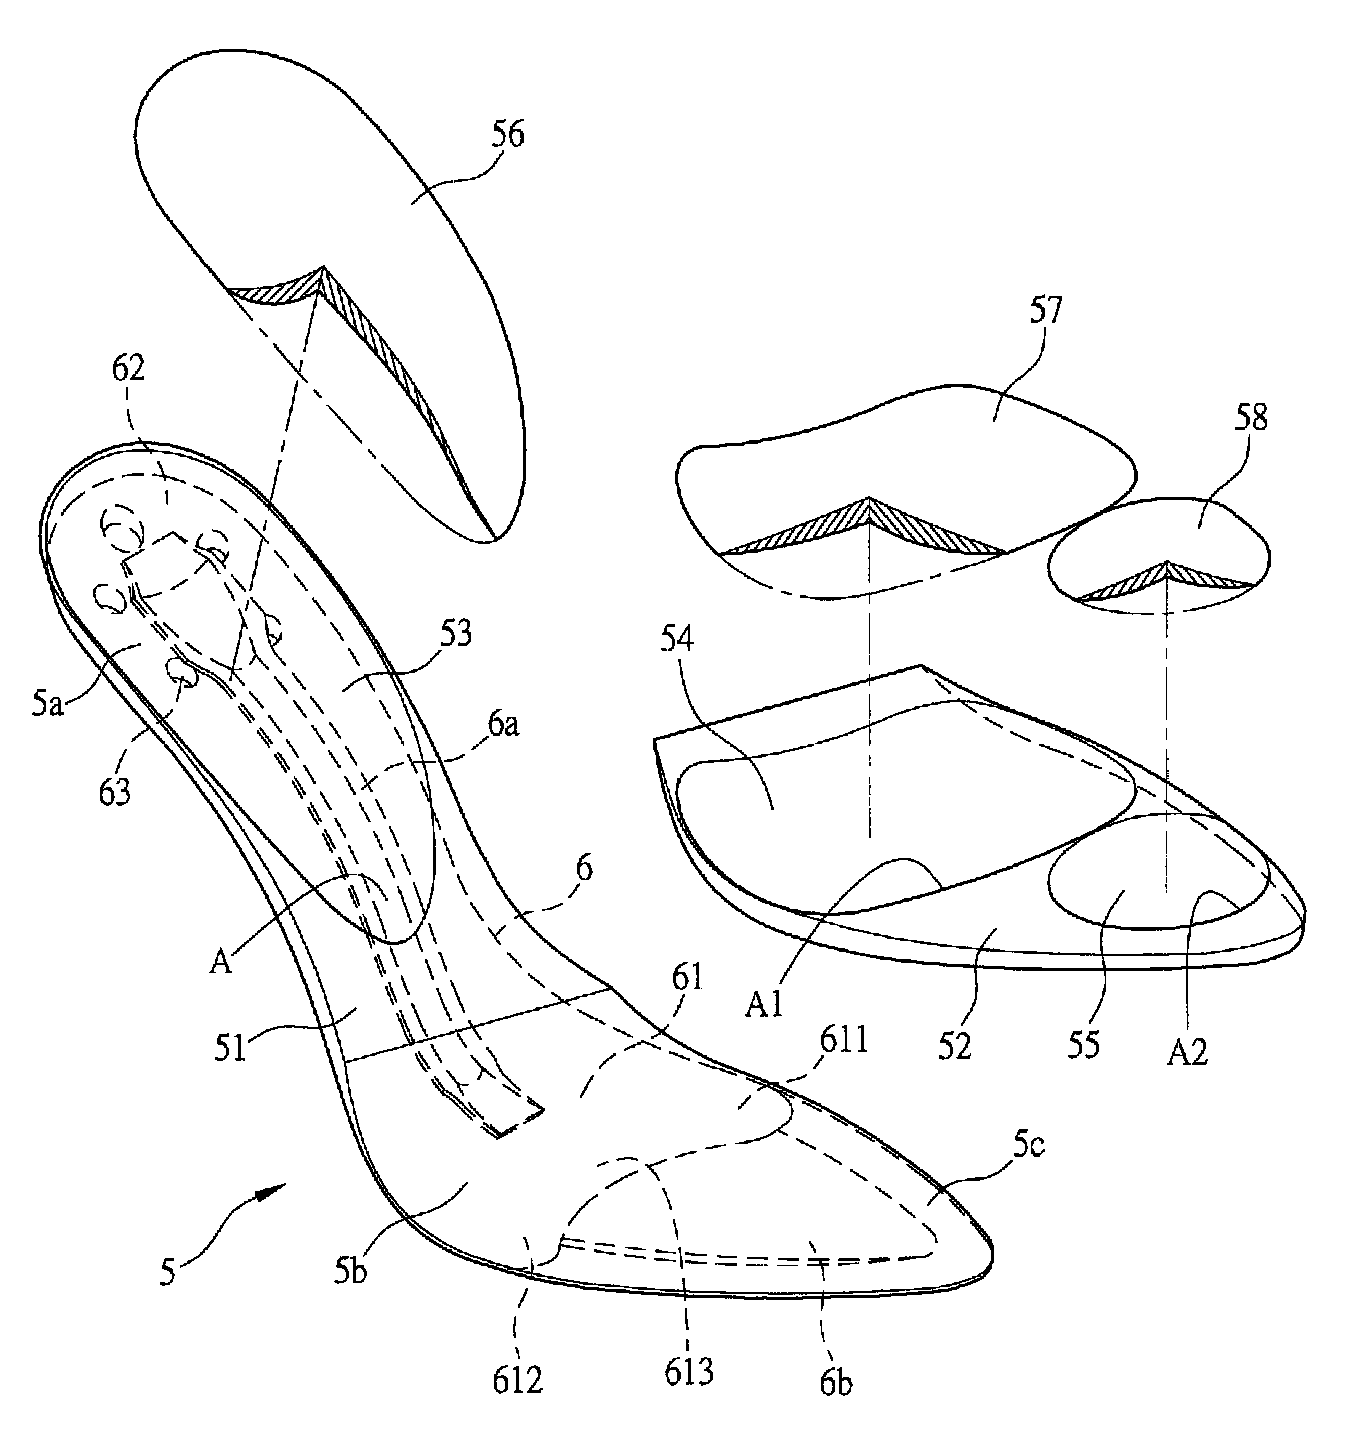 Structure of high-heeled shoe